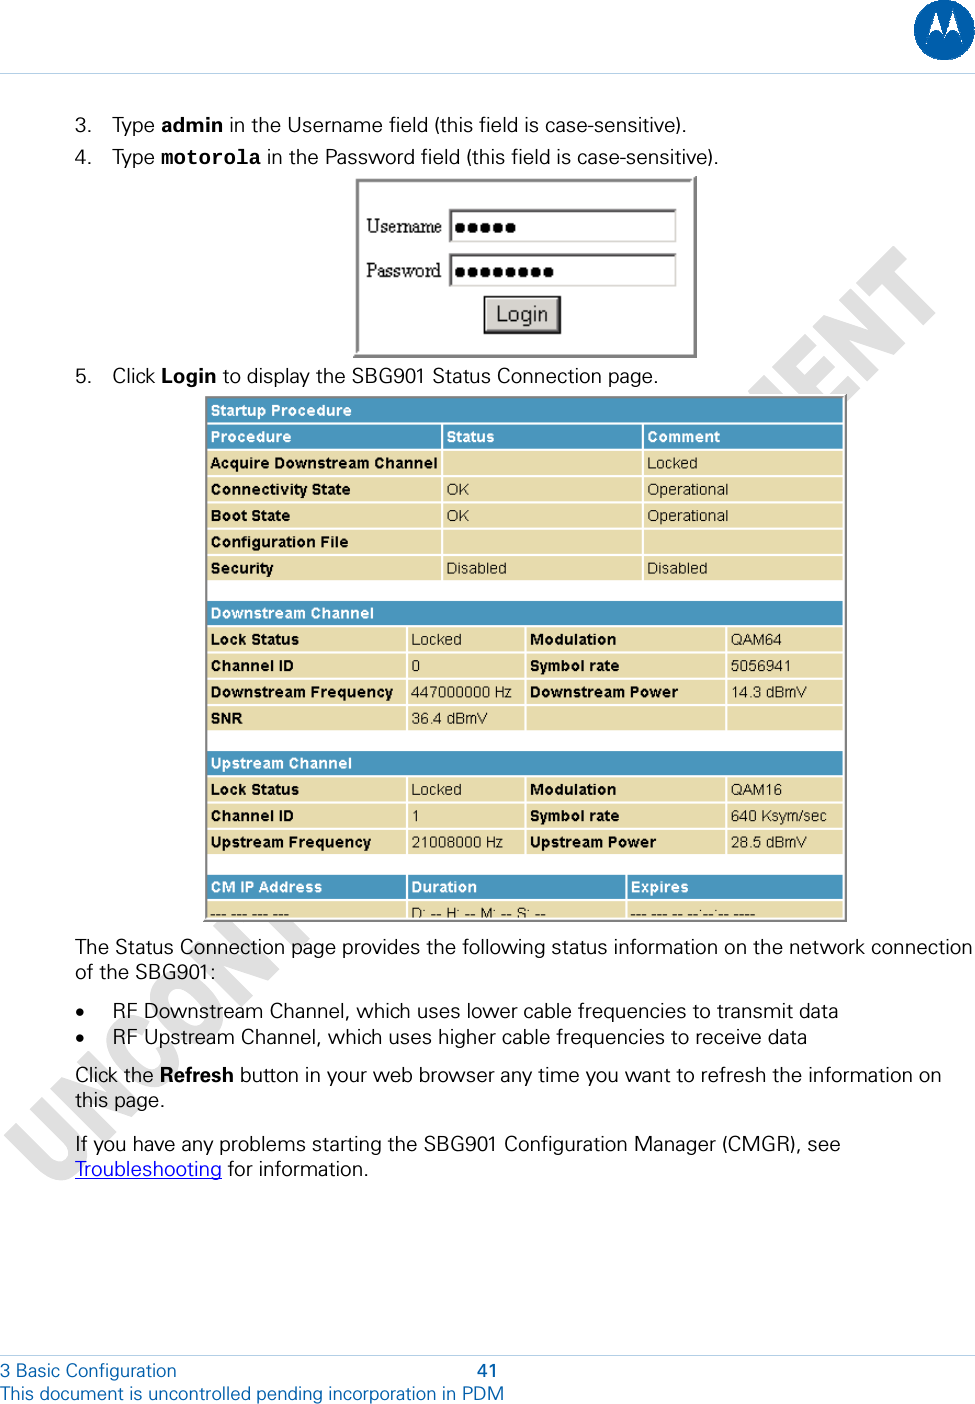  3. Type admin in the Username field (this field is case-sensitive). 4. Type motorola in the Password field (this field is case-sensitive).  5. Click Login to display the SBG901 Status Connection page.  The Status Connection page provides the following status information on the network connection of the SBG901:  • RF Downstream Channel, which uses lower cable frequencies to transmit data • RF Upstream Channel, which uses higher cable frequencies to receive data Click the Refresh button in your web browser any time you want to refresh the information on this page. If you have any problems starting the SBG901 Configuration Manager (CMGR), see Troubleshooting for information. 3 Basic Configuration  41 This document is uncontrolled pending incorporation in PDM  